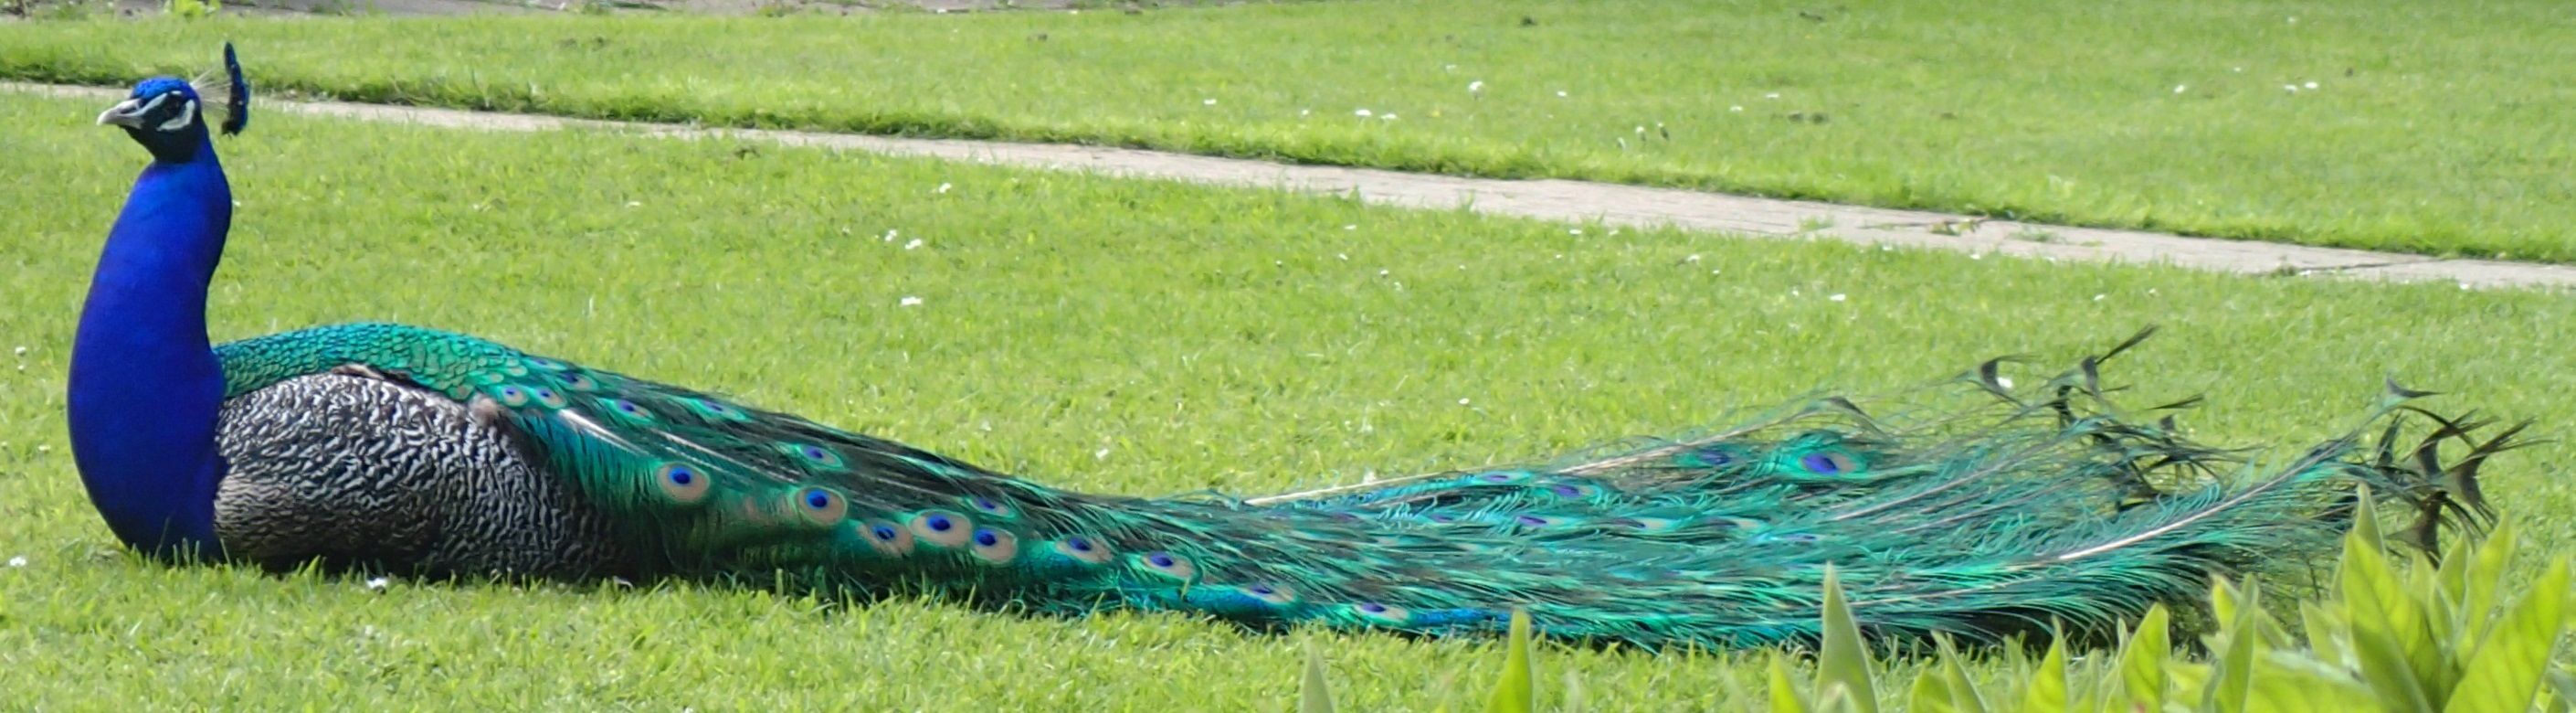 Peacock_at_cat_rescue_centre_May_2017 (1).jpg